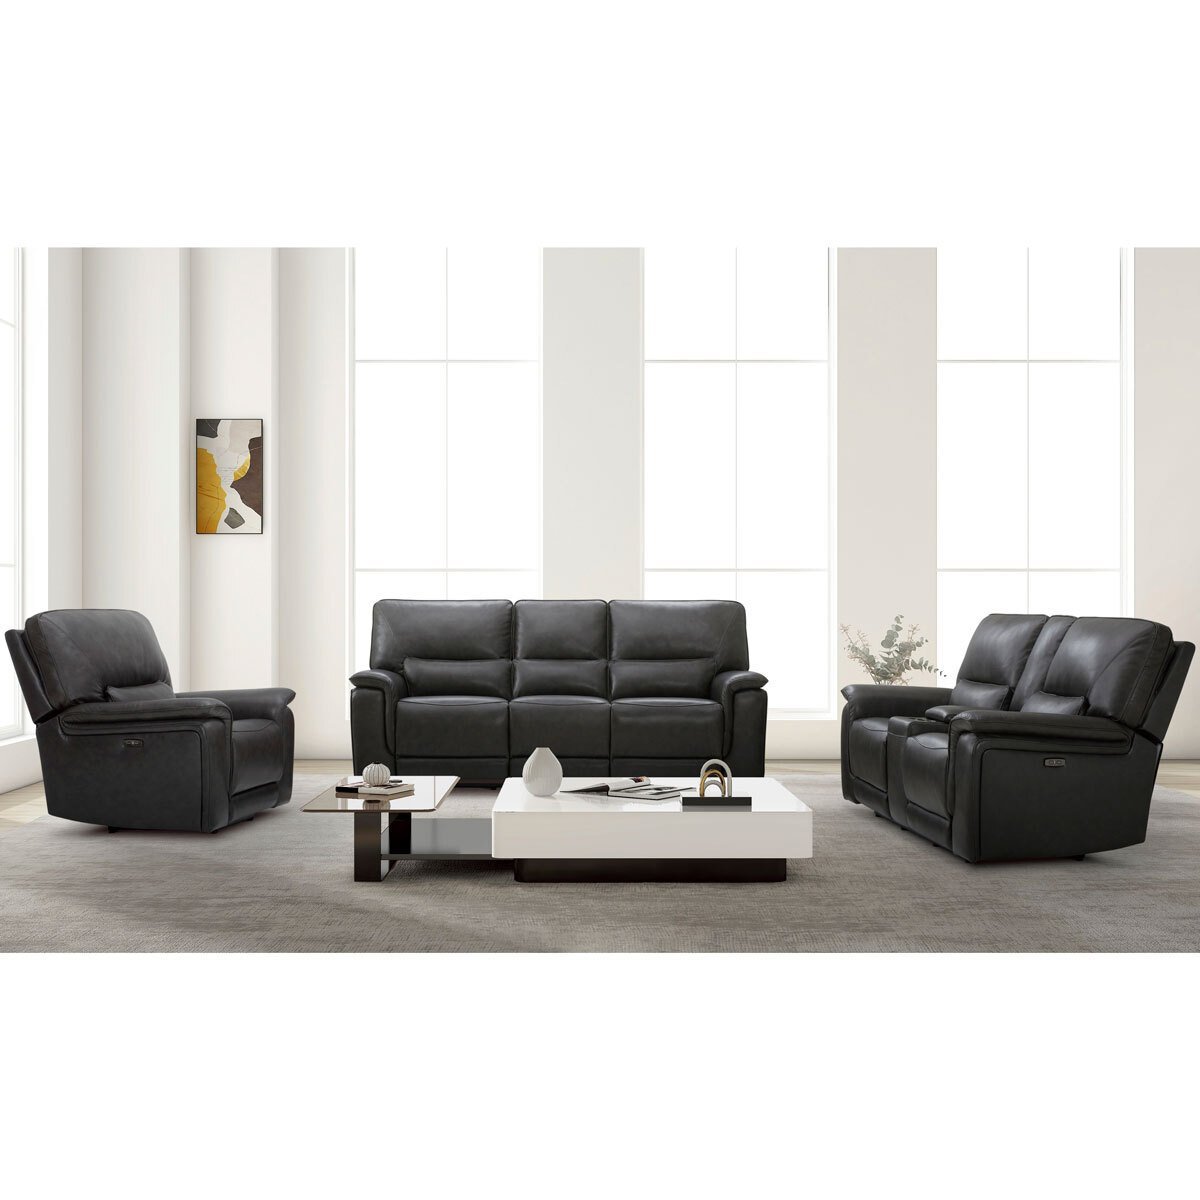 Gilman Creek Maxwell Grey Leather Power Recliner 3 Seater Sofa With Power Headrests - Signature Retail Stores